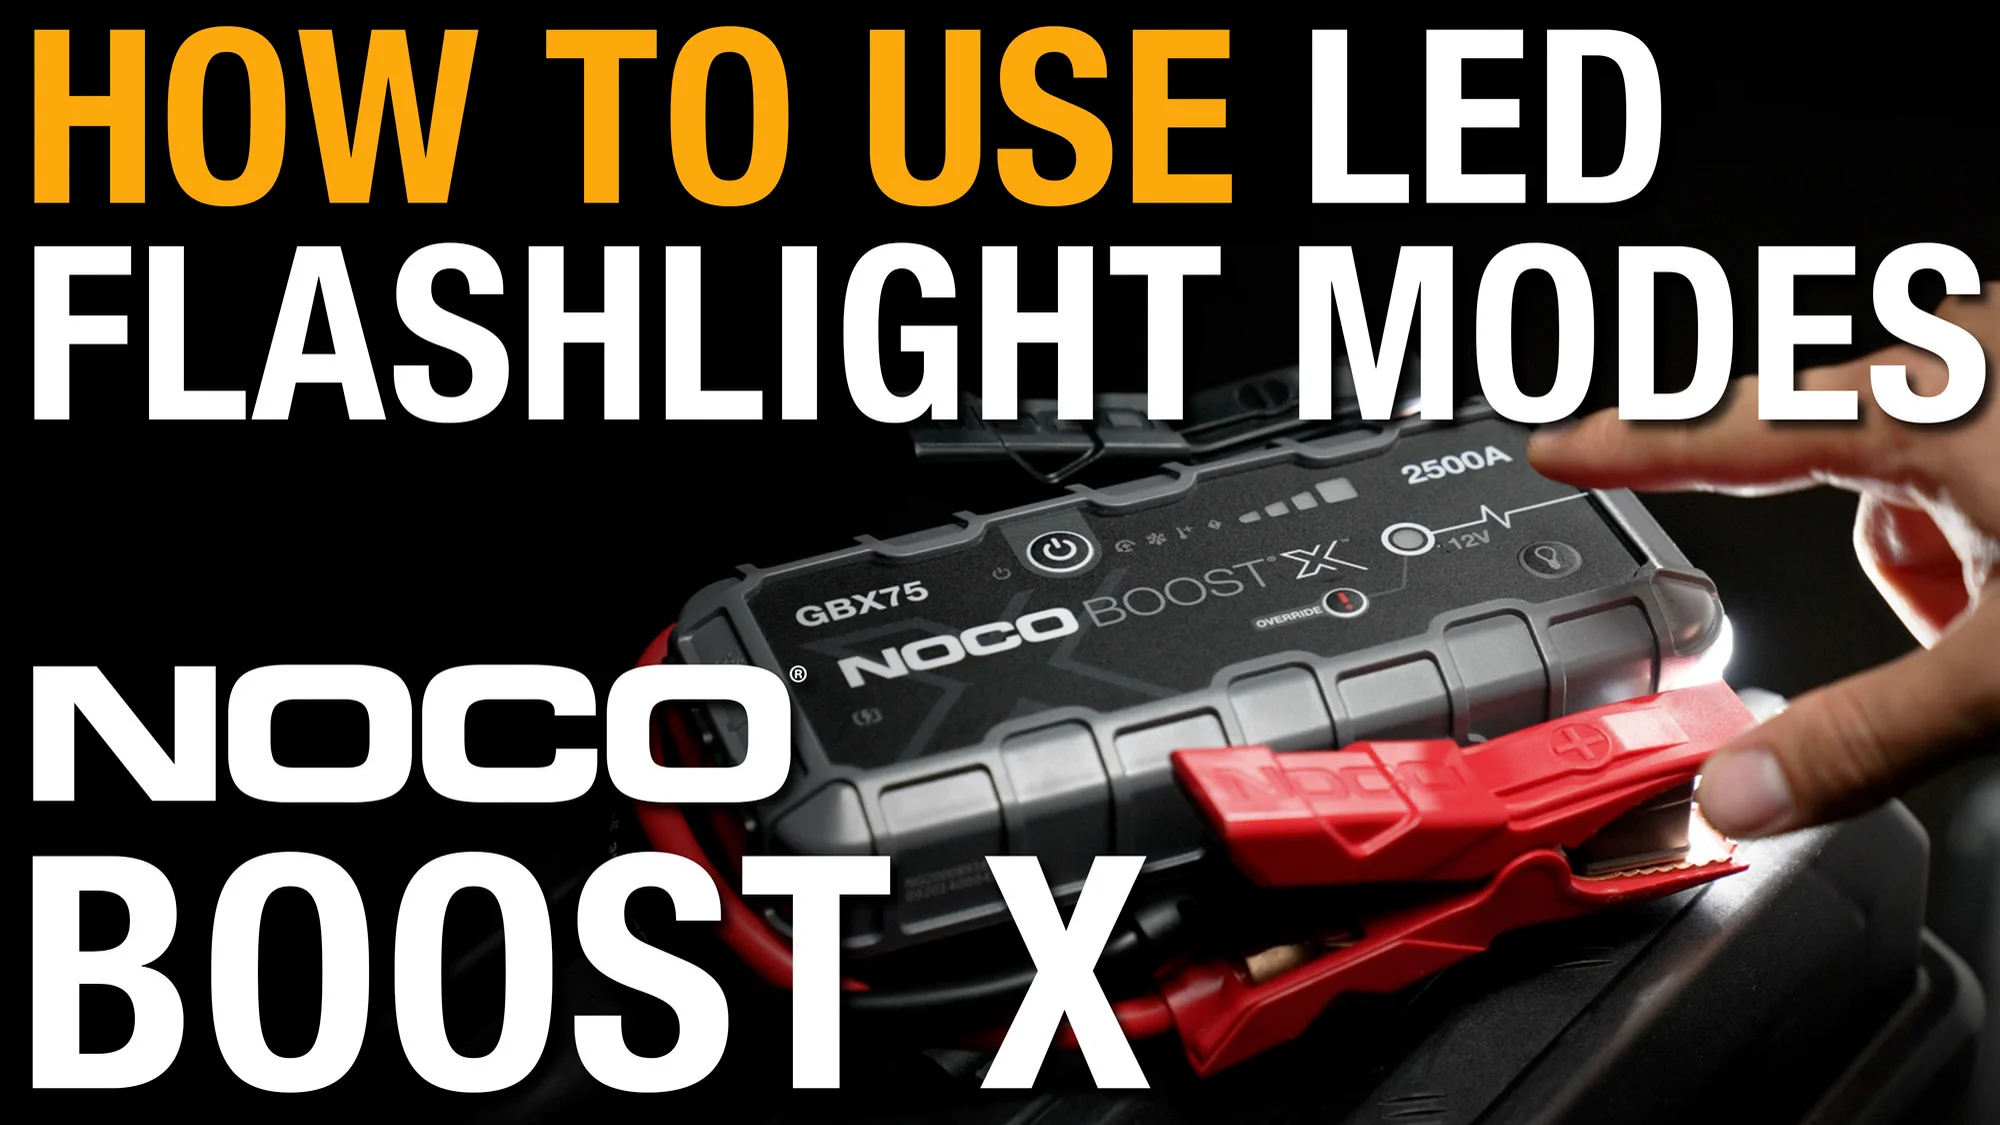 How to use the LED Flashlight Modes on NOCO Boost X on Vimeo